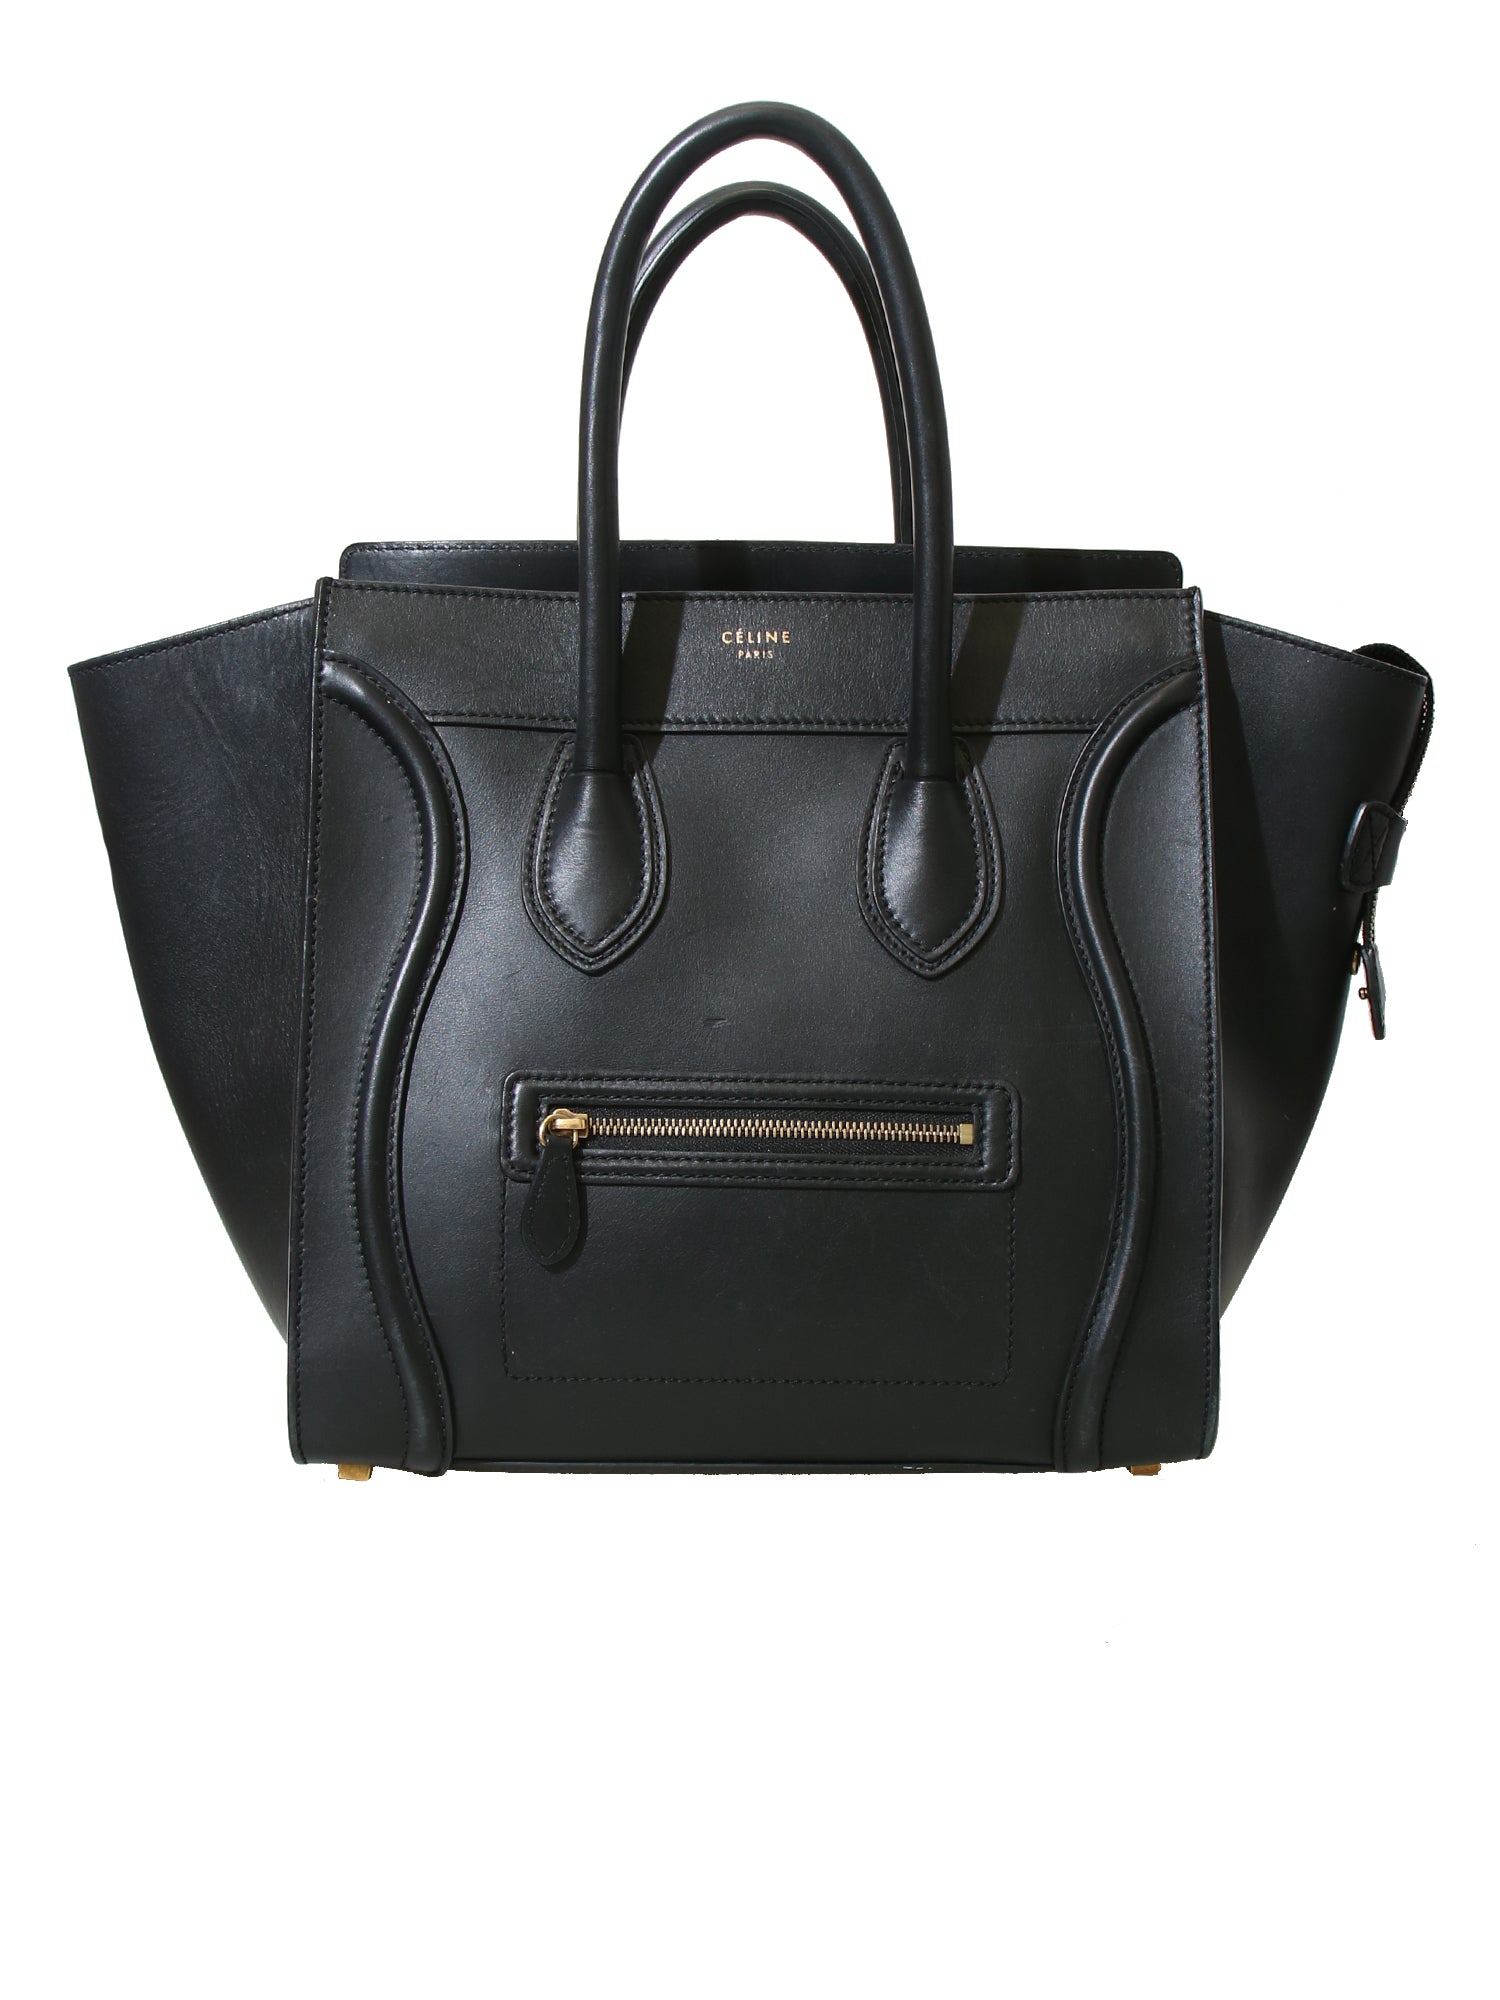 GUIDE TO CELINE: CLASSIC TIMELESS BAGS | Bag Religion